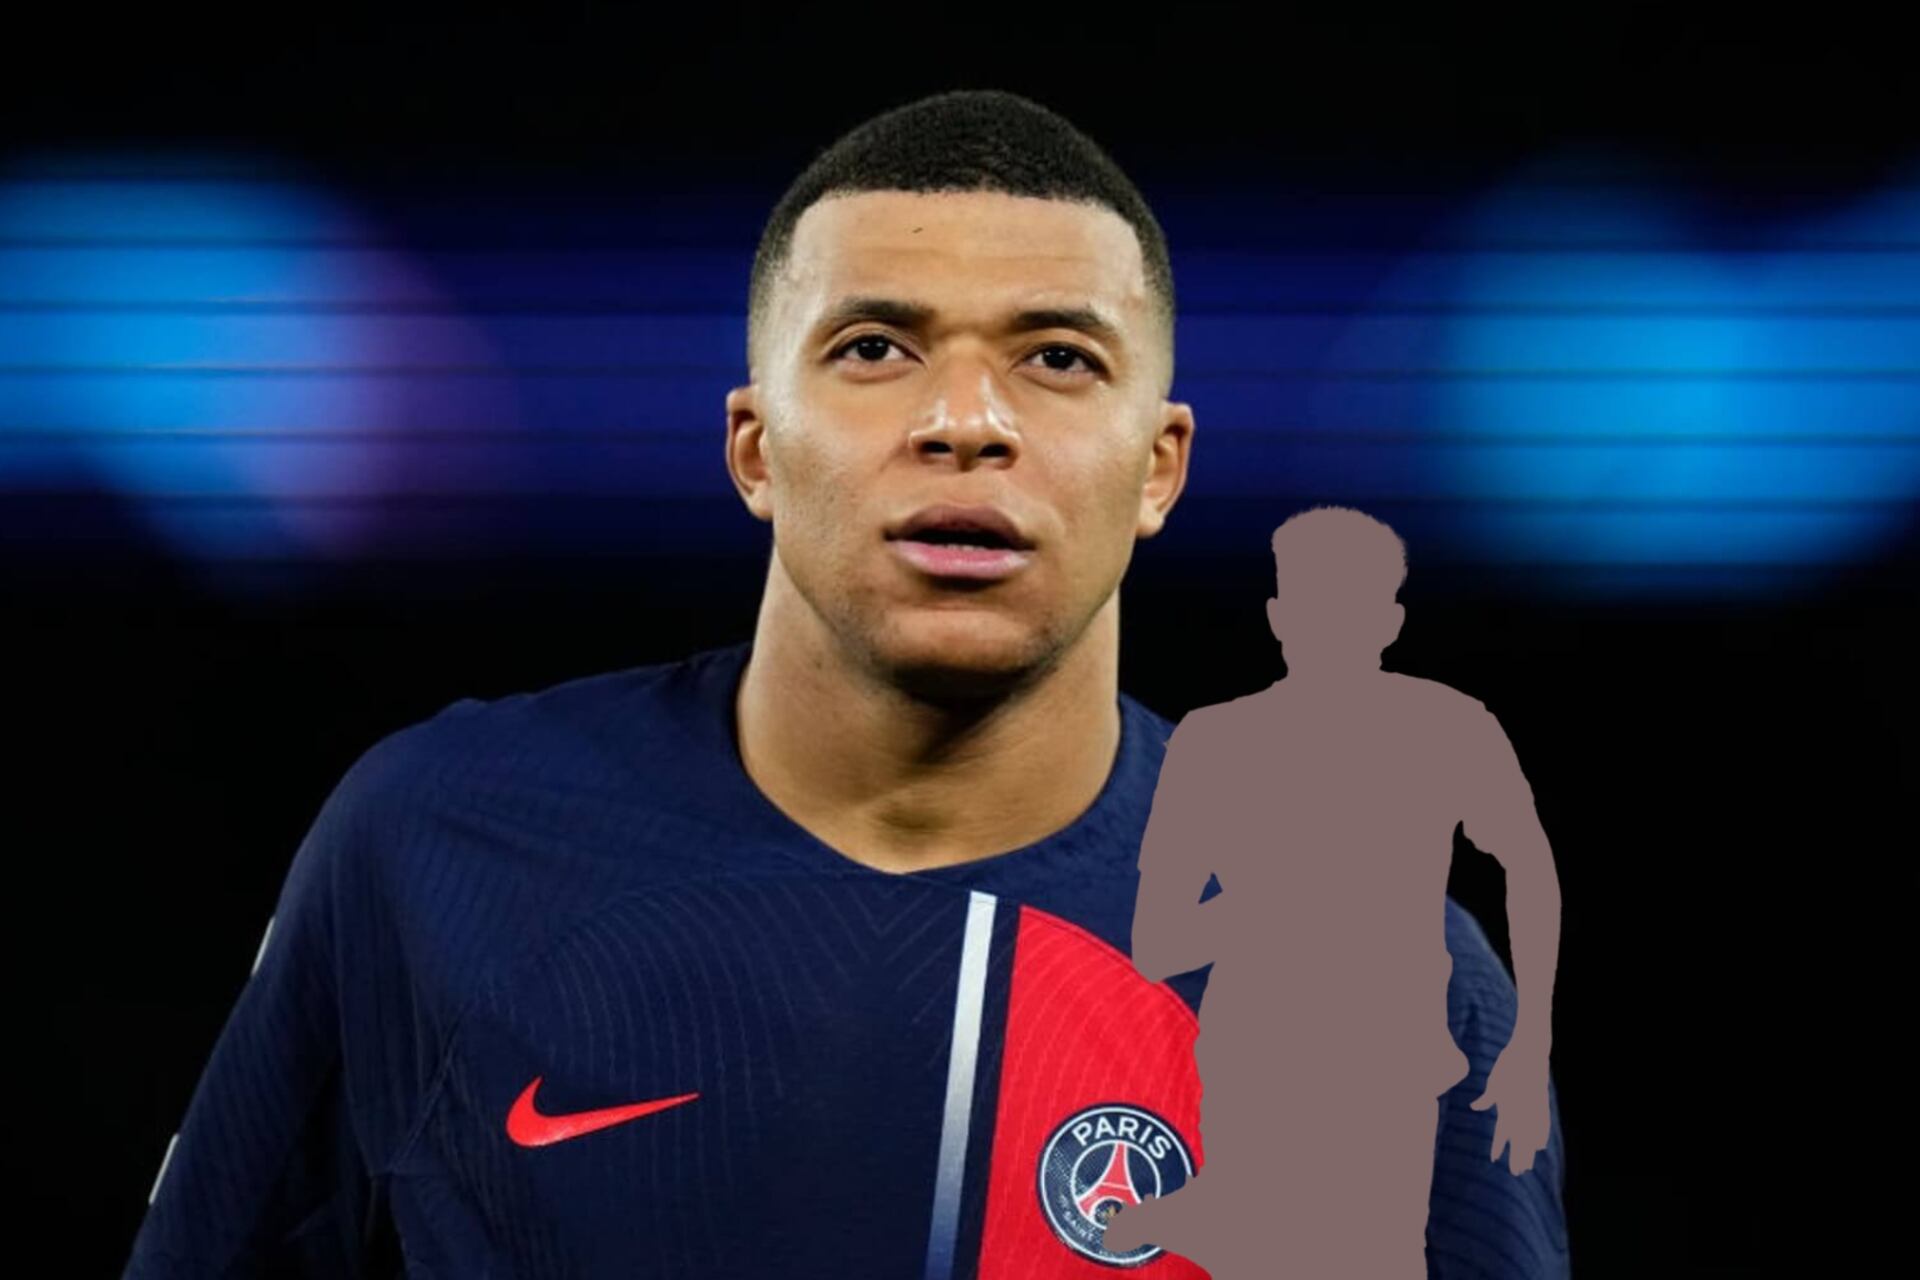 PSG still looking for Mbappé's replacement and Liverpool has the solution, for more than $80M, the star they would take